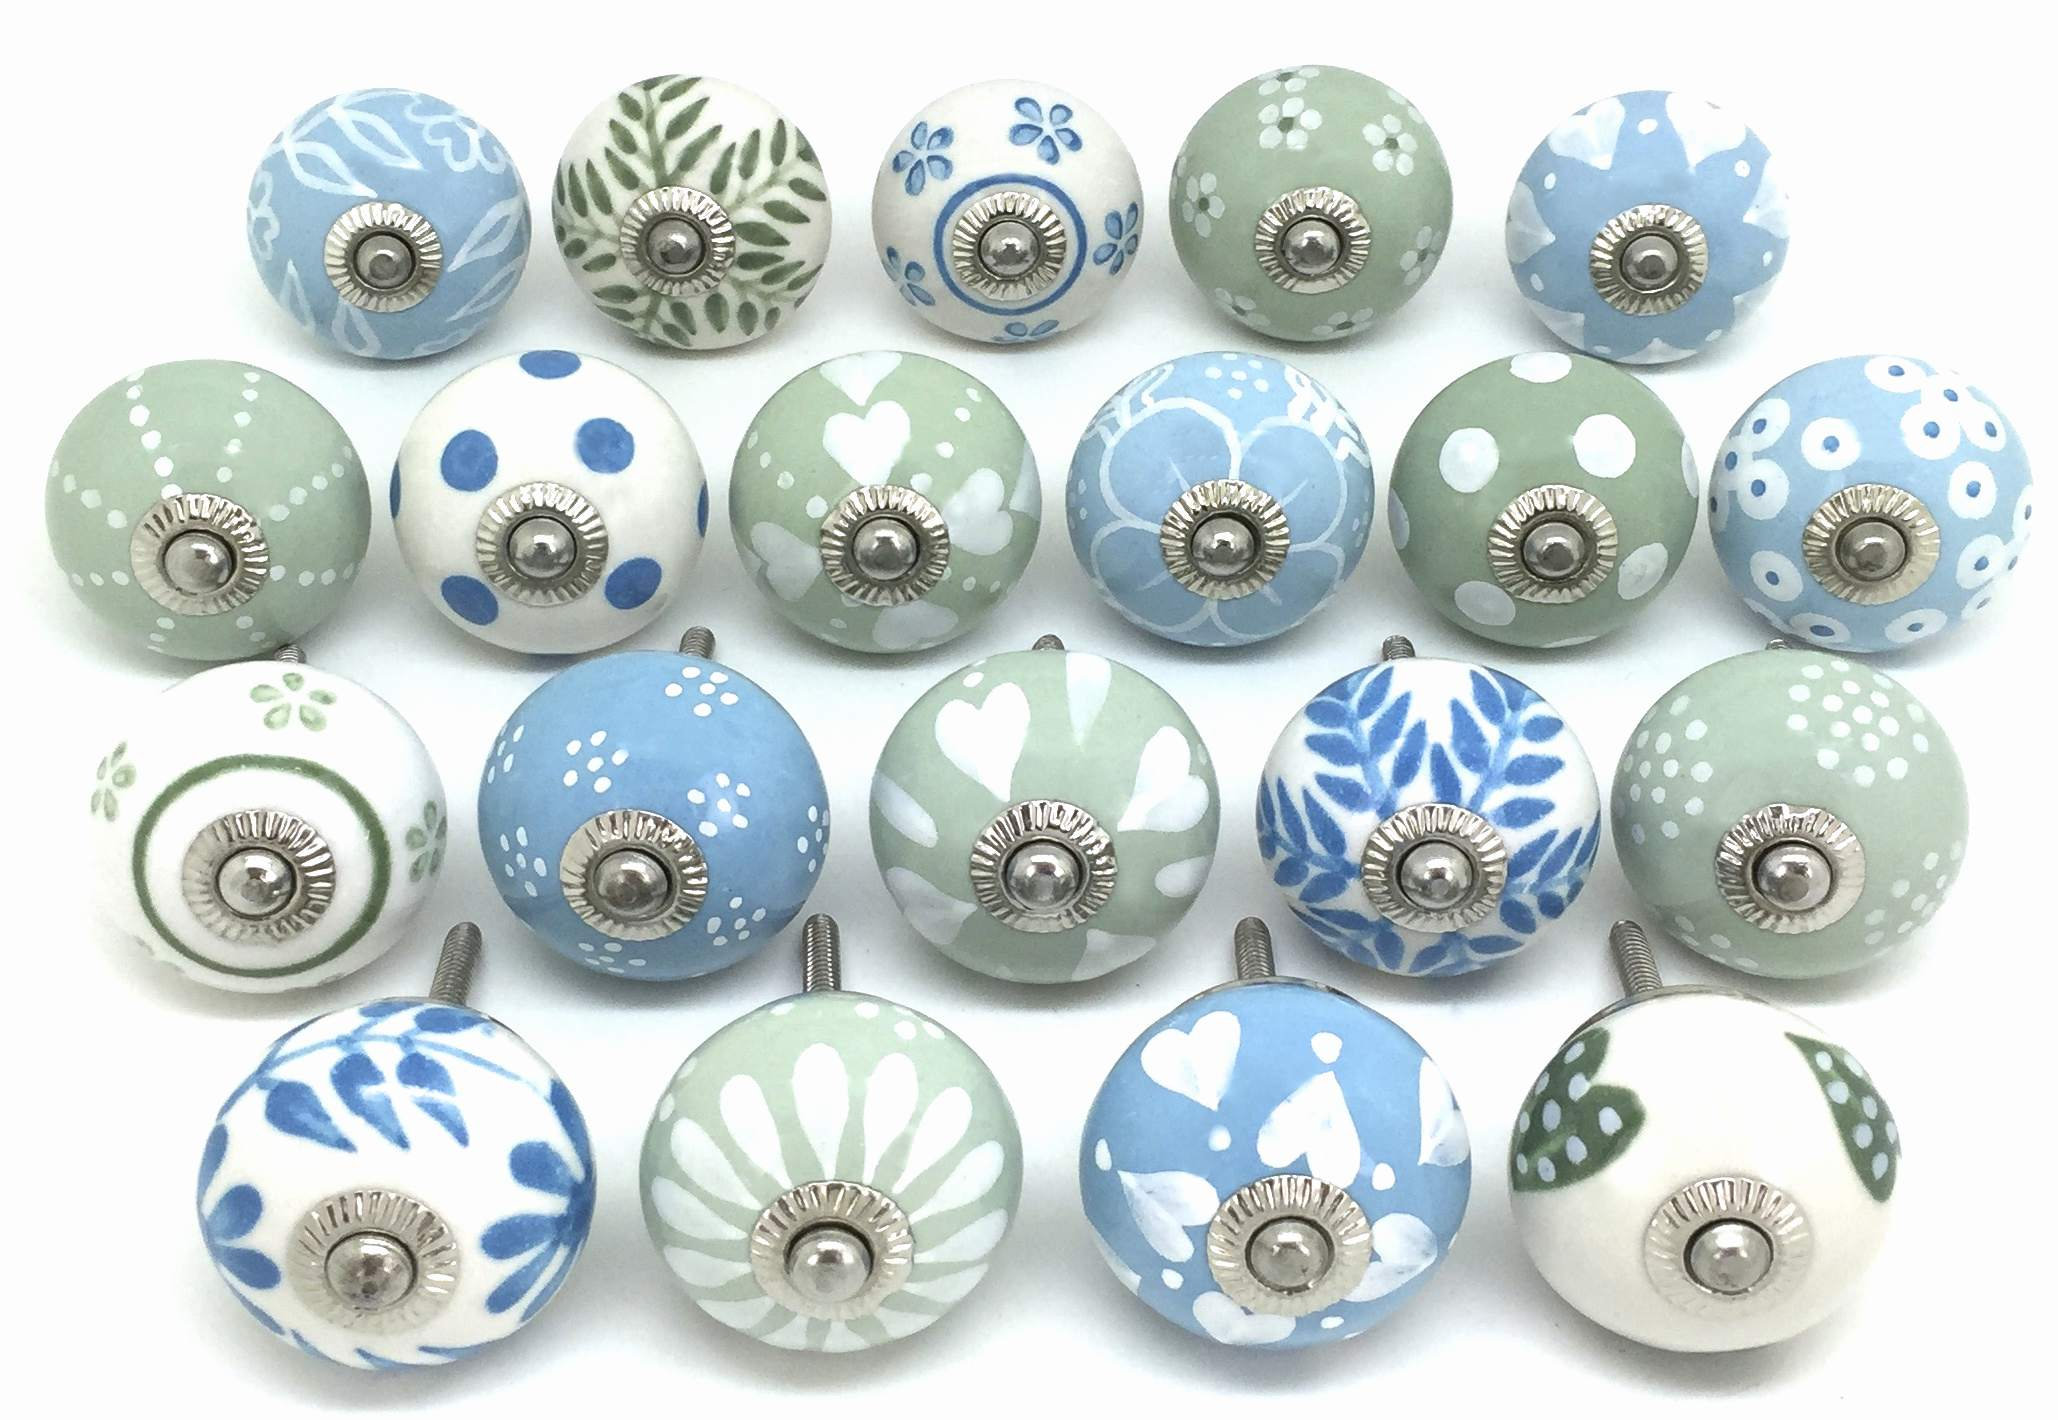 Kitchen Cabinet Knobs Nz Awesome Elegant Kitchen Cabinet Knobs And intended for size 2058 X 1420